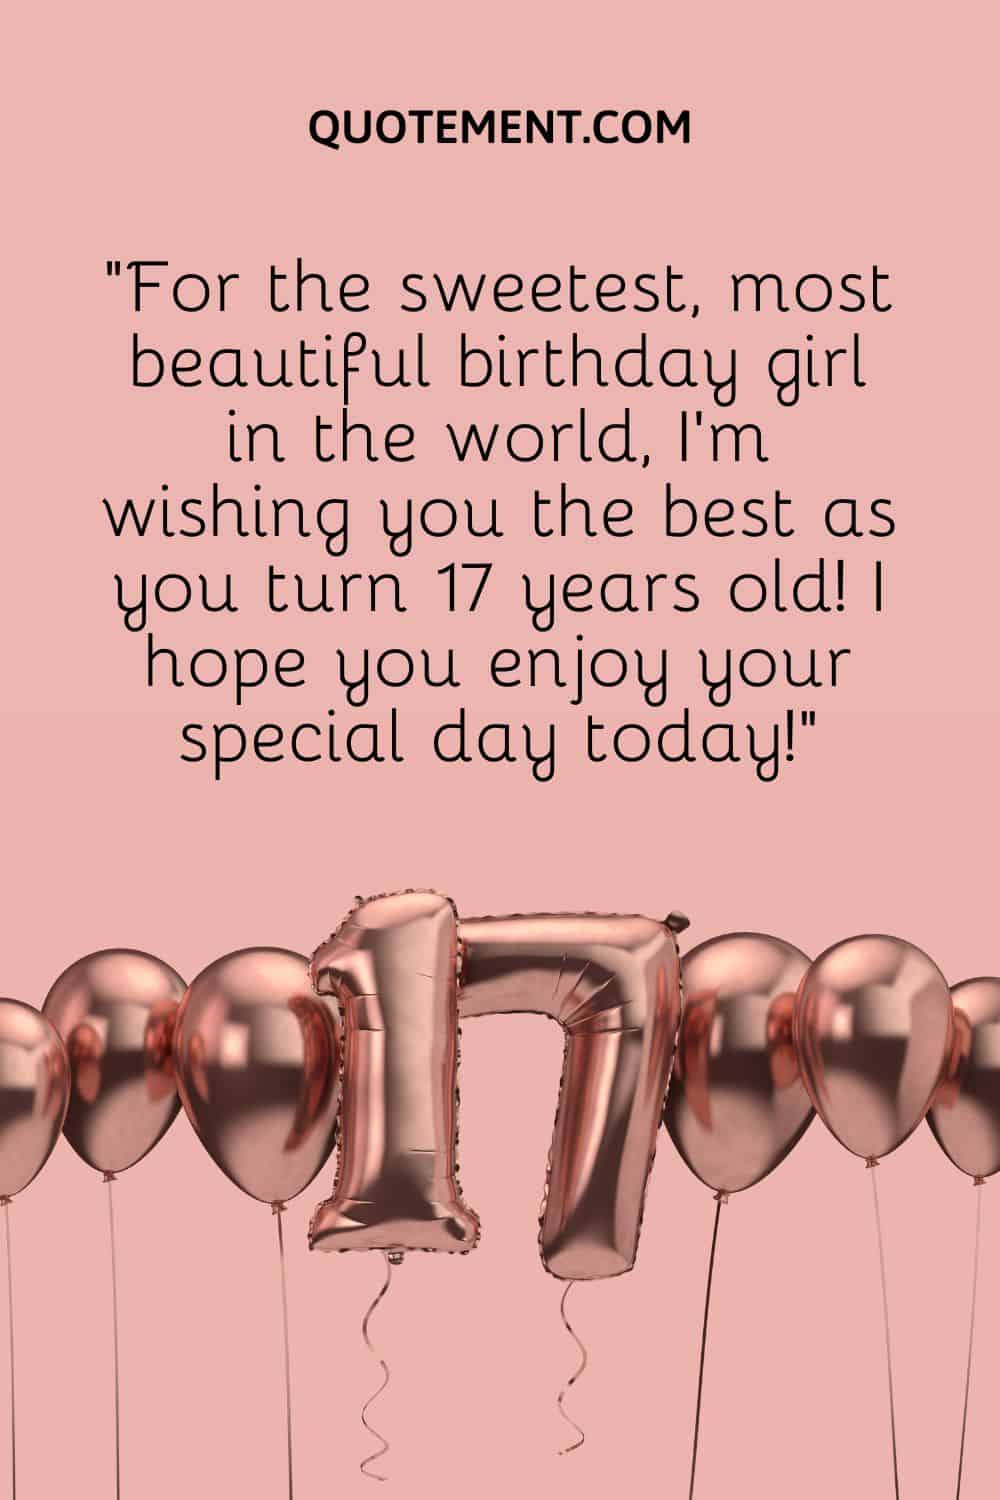 “For the sweetest, most beautiful birthday girl in the world, I’m wishing you the best as you turn 17 years old! I hope you enjoy your special day today!”